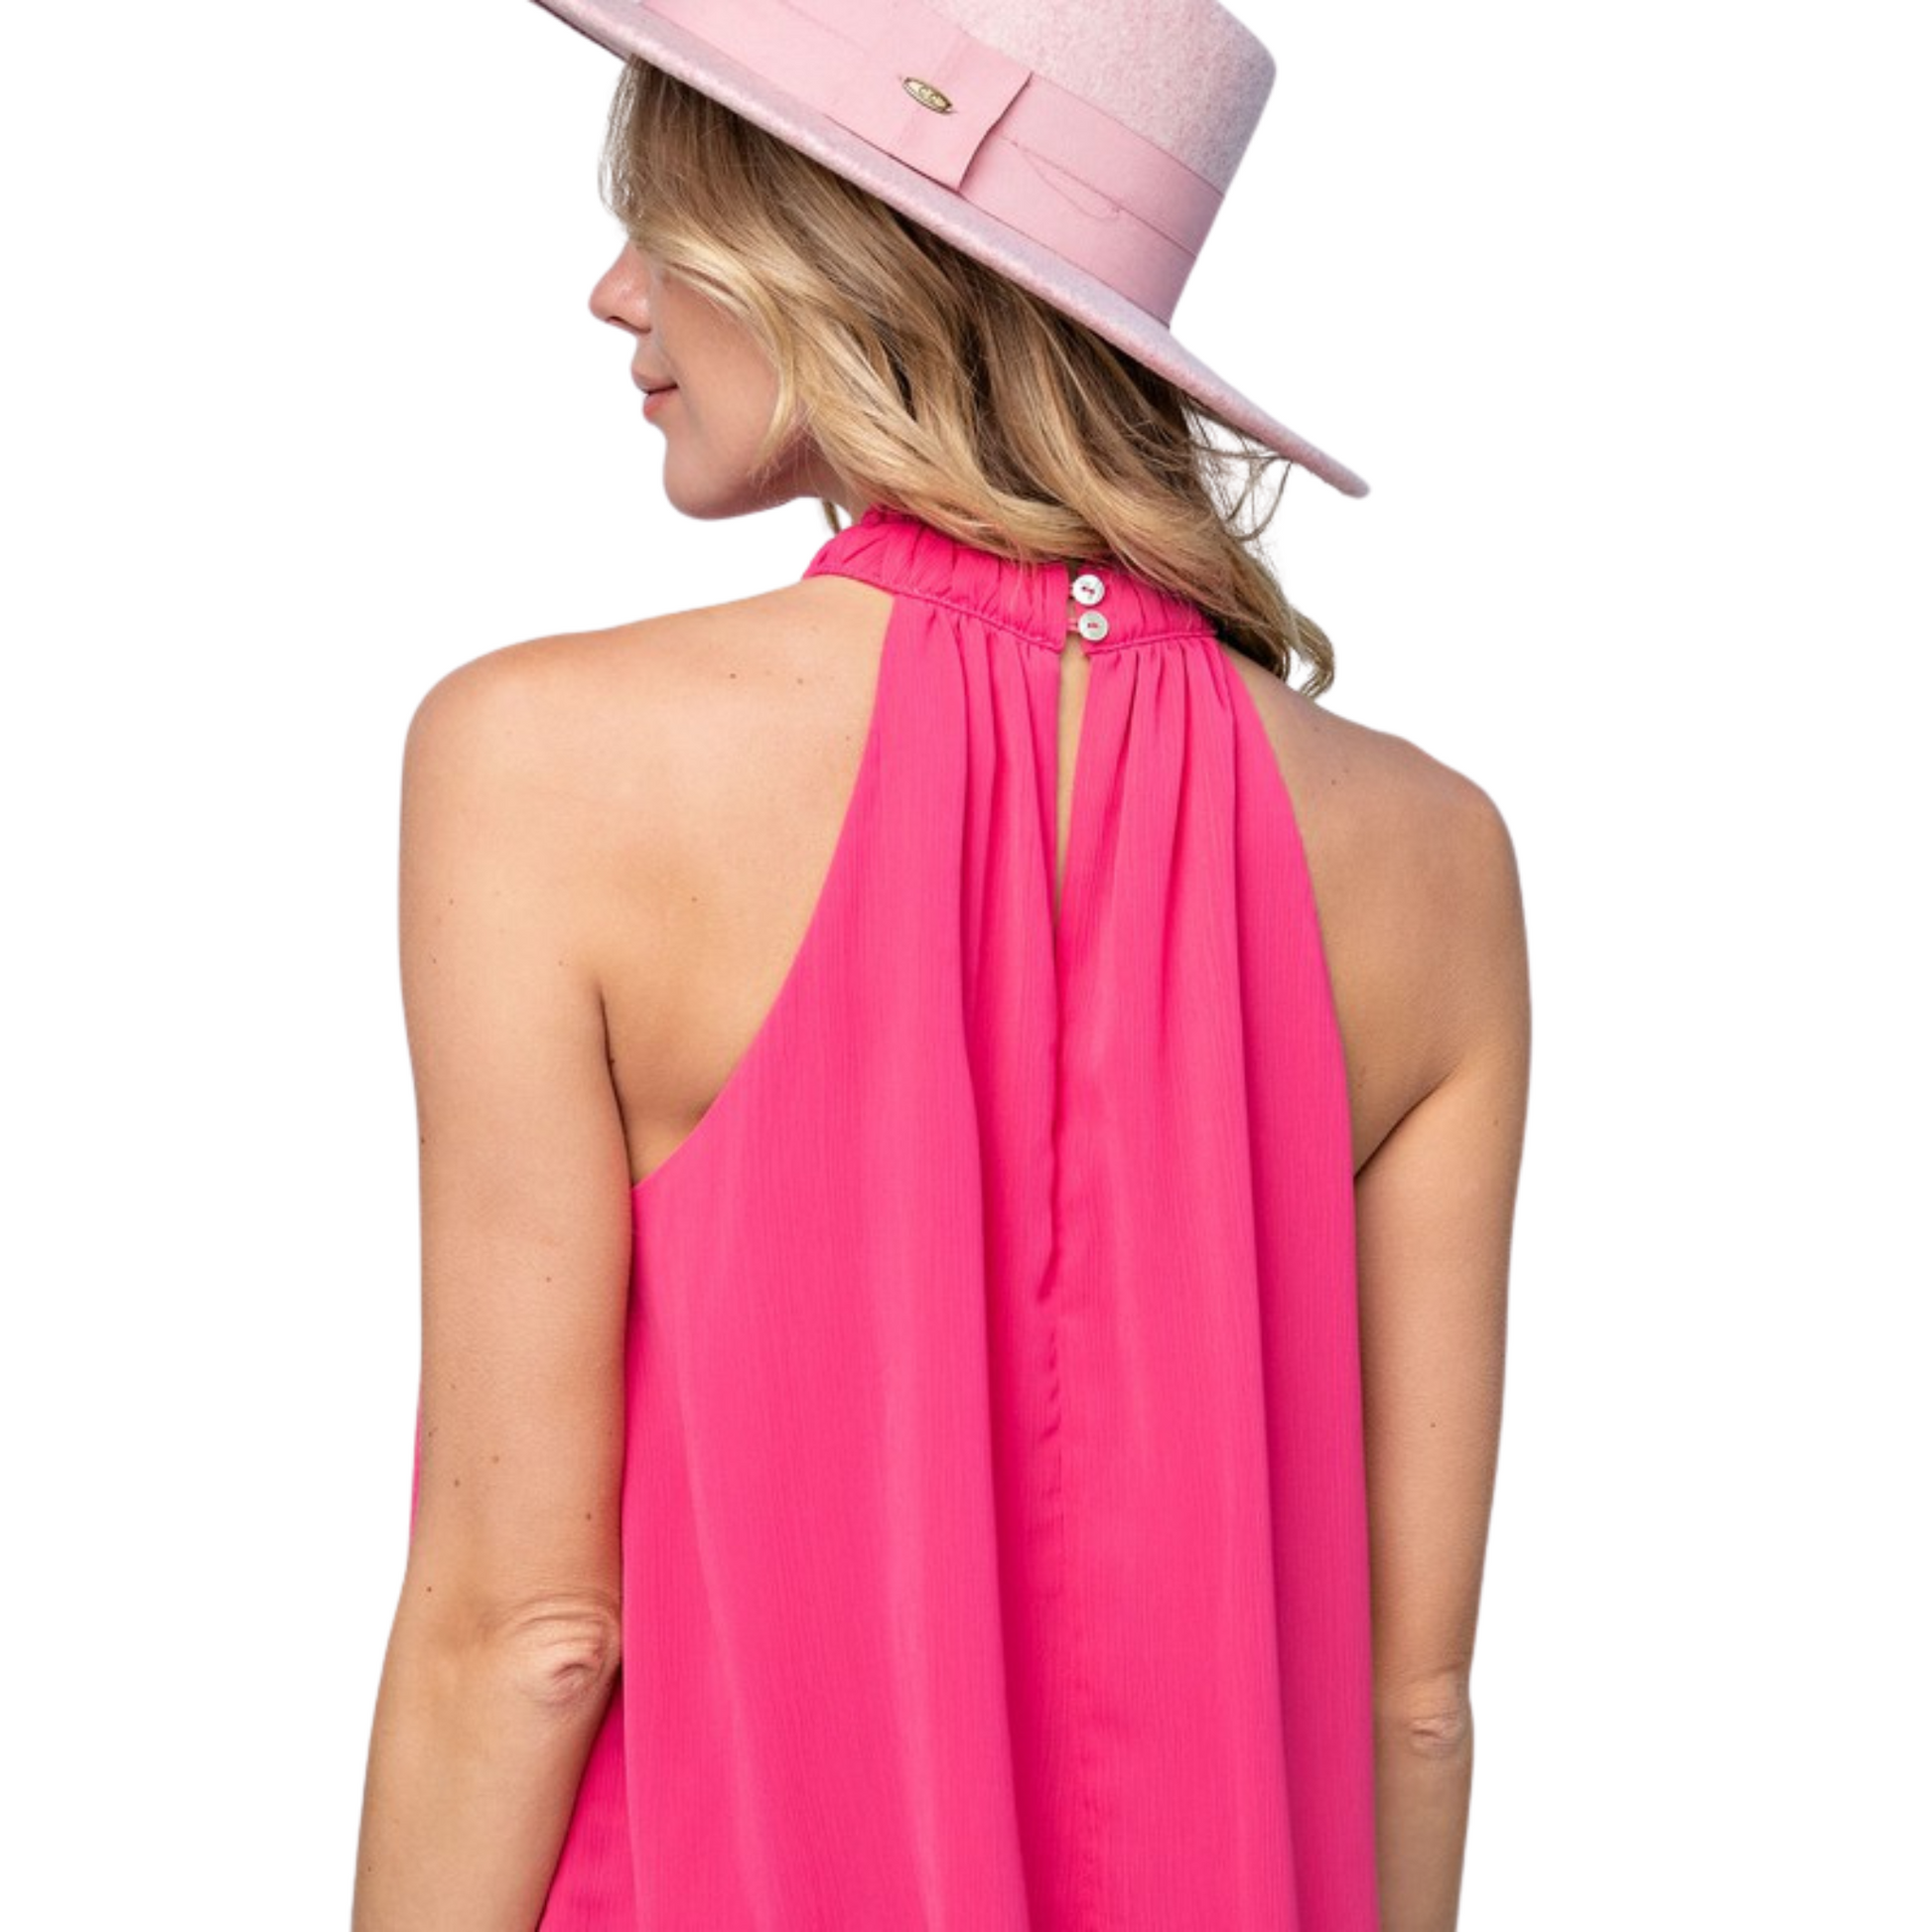 This sleeveless Yoryu chiffon top by will add an instant pop of color to any outfit. Available in a stunning hot pink hue, this top features a high neckline and lightweight fabric, perfect for all-day comfort and style.